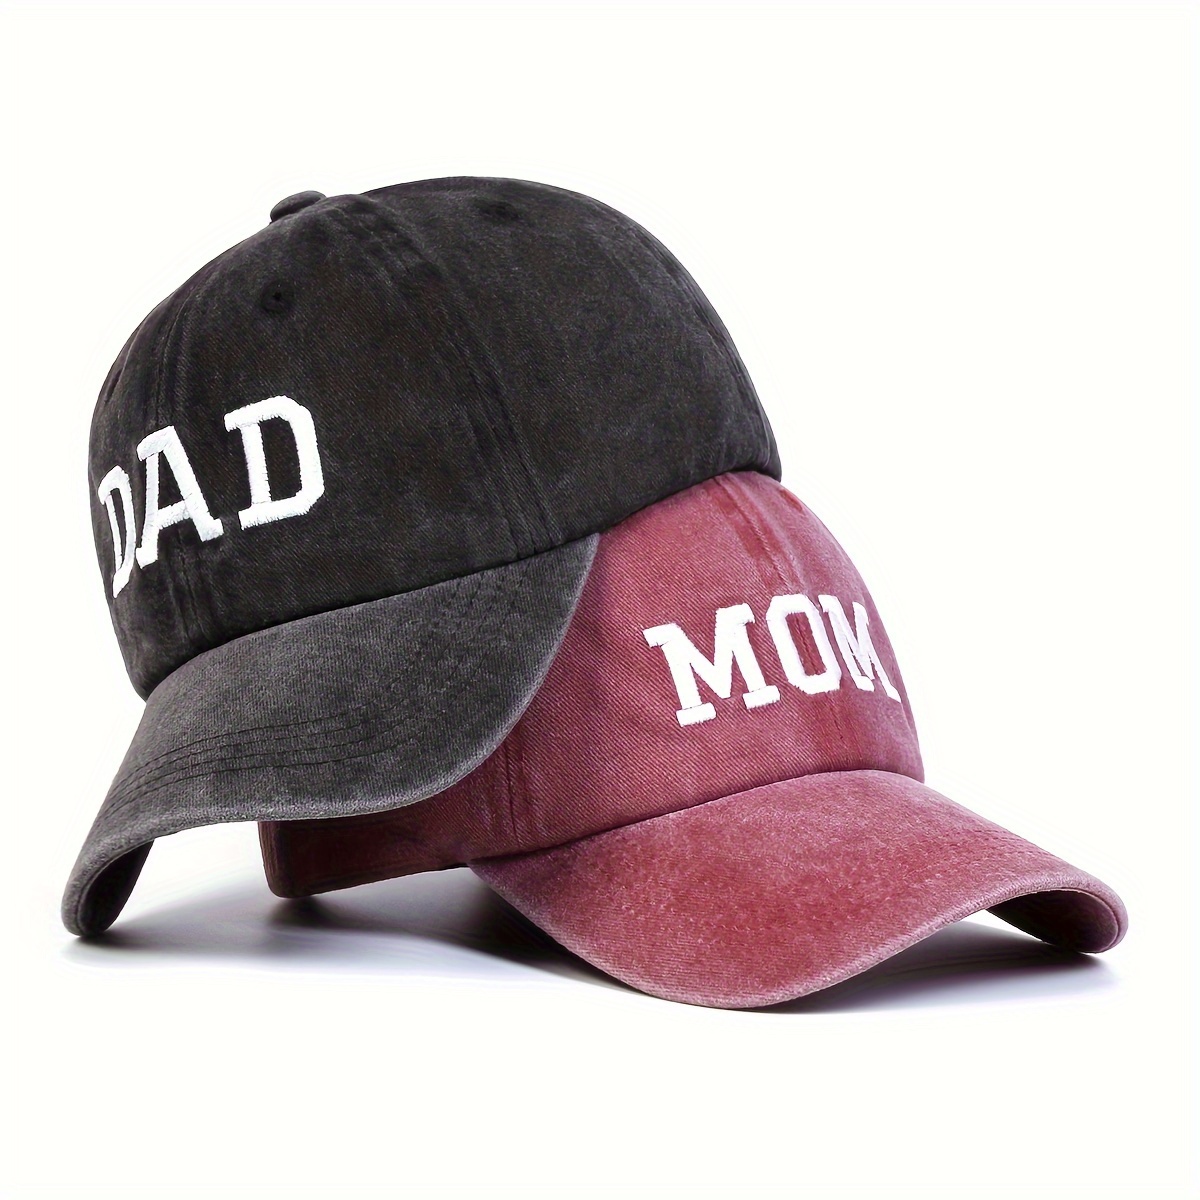 

Vintage Washed Distressed Baseball Cap, Embroidered "mom" "dad" Lettering Peaked Hat, Suitable For Father'sday, Mother's Day